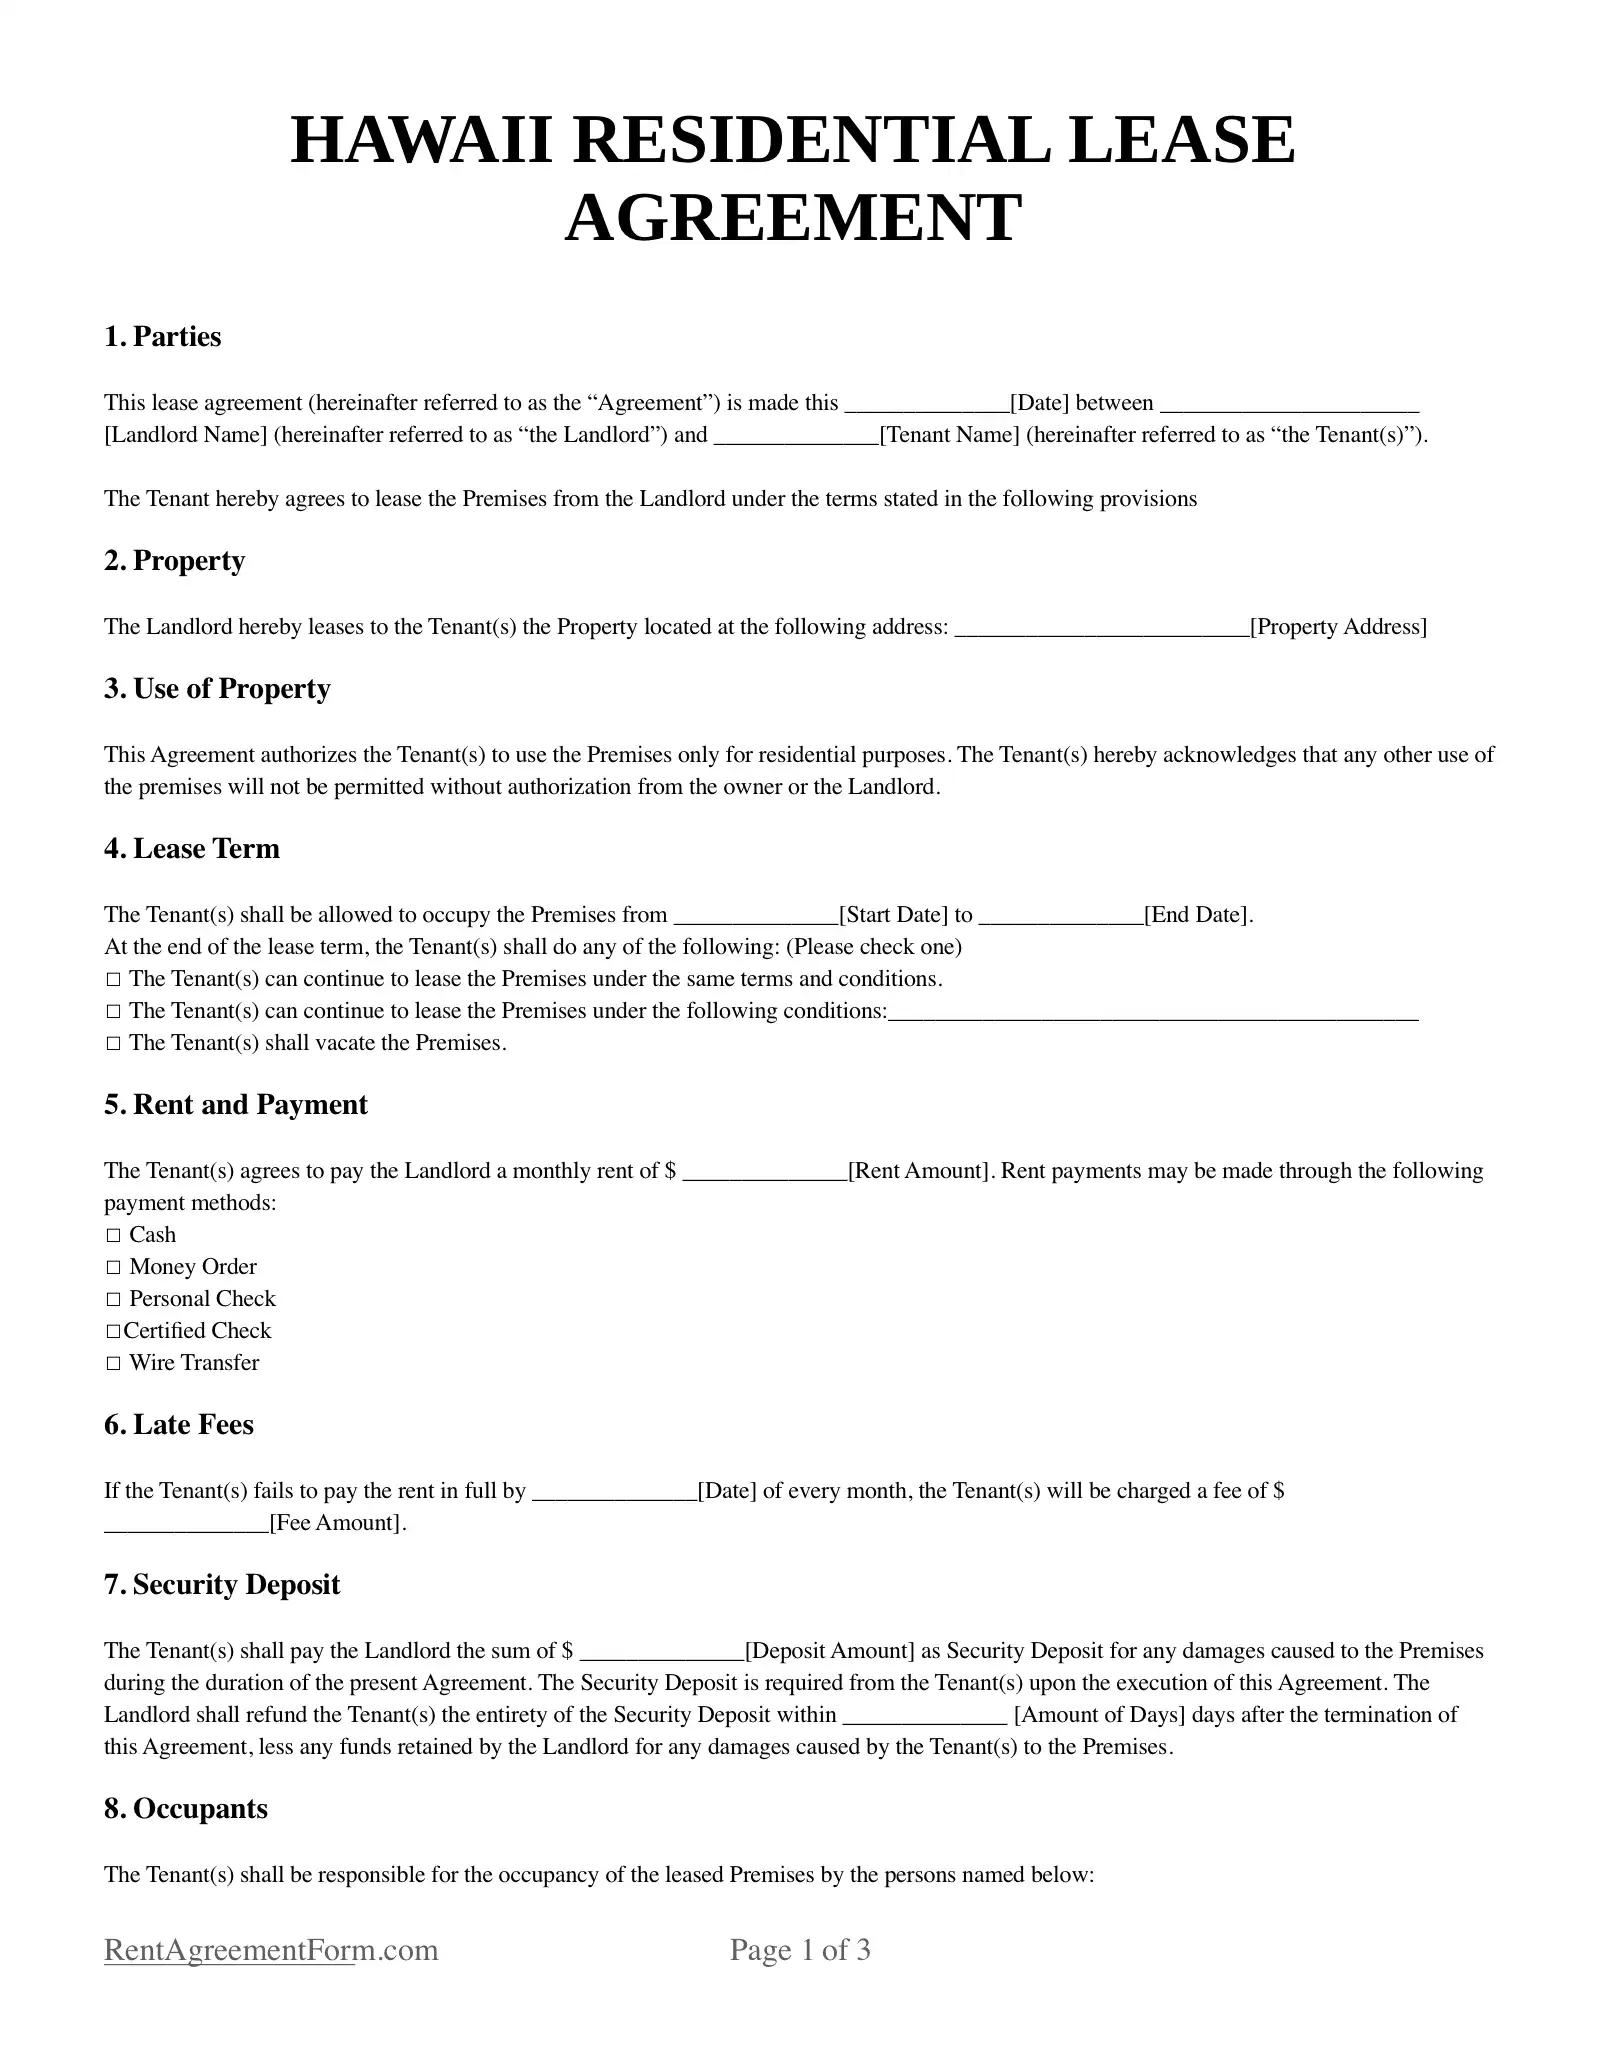 Hawaii Residential Lease Agreement Sample